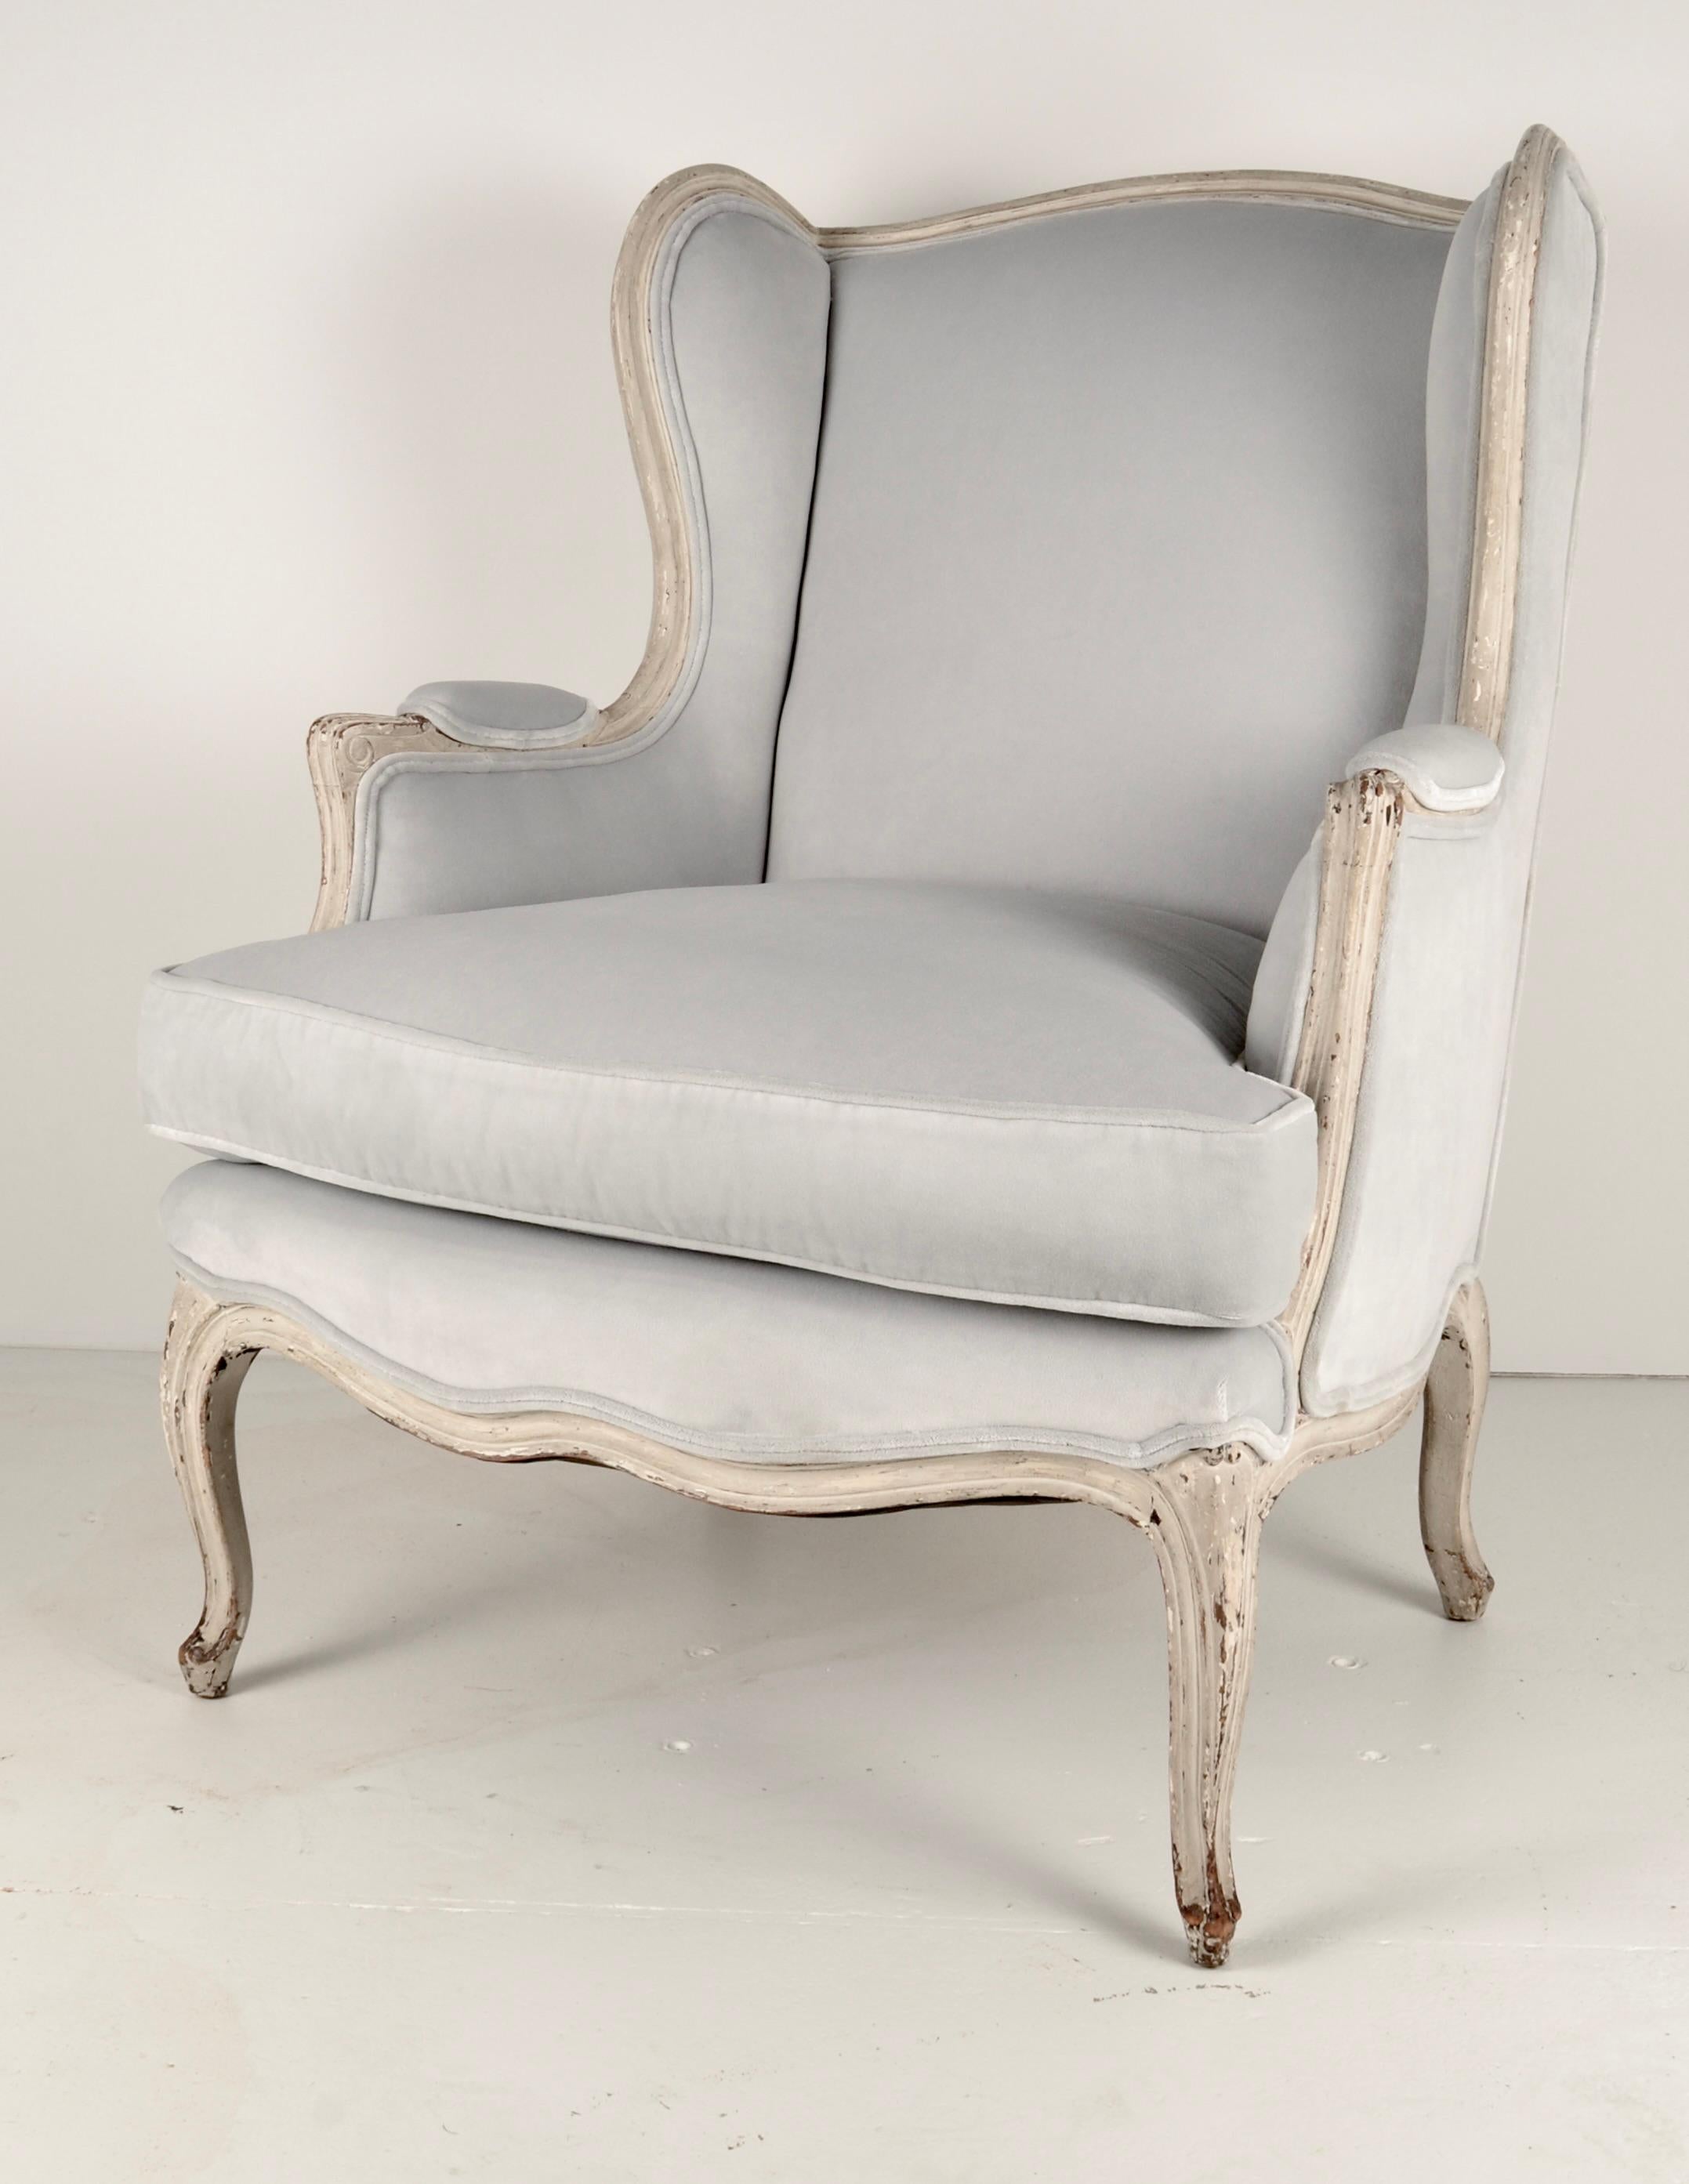 In the style of Louis XV, this French lounge chair with wing back details has wonderful patina on the fruitwood frame: natural wear of the original paint. The chair has been newly upholstered in a pale gray/blue quality velvet. Very fine condition.